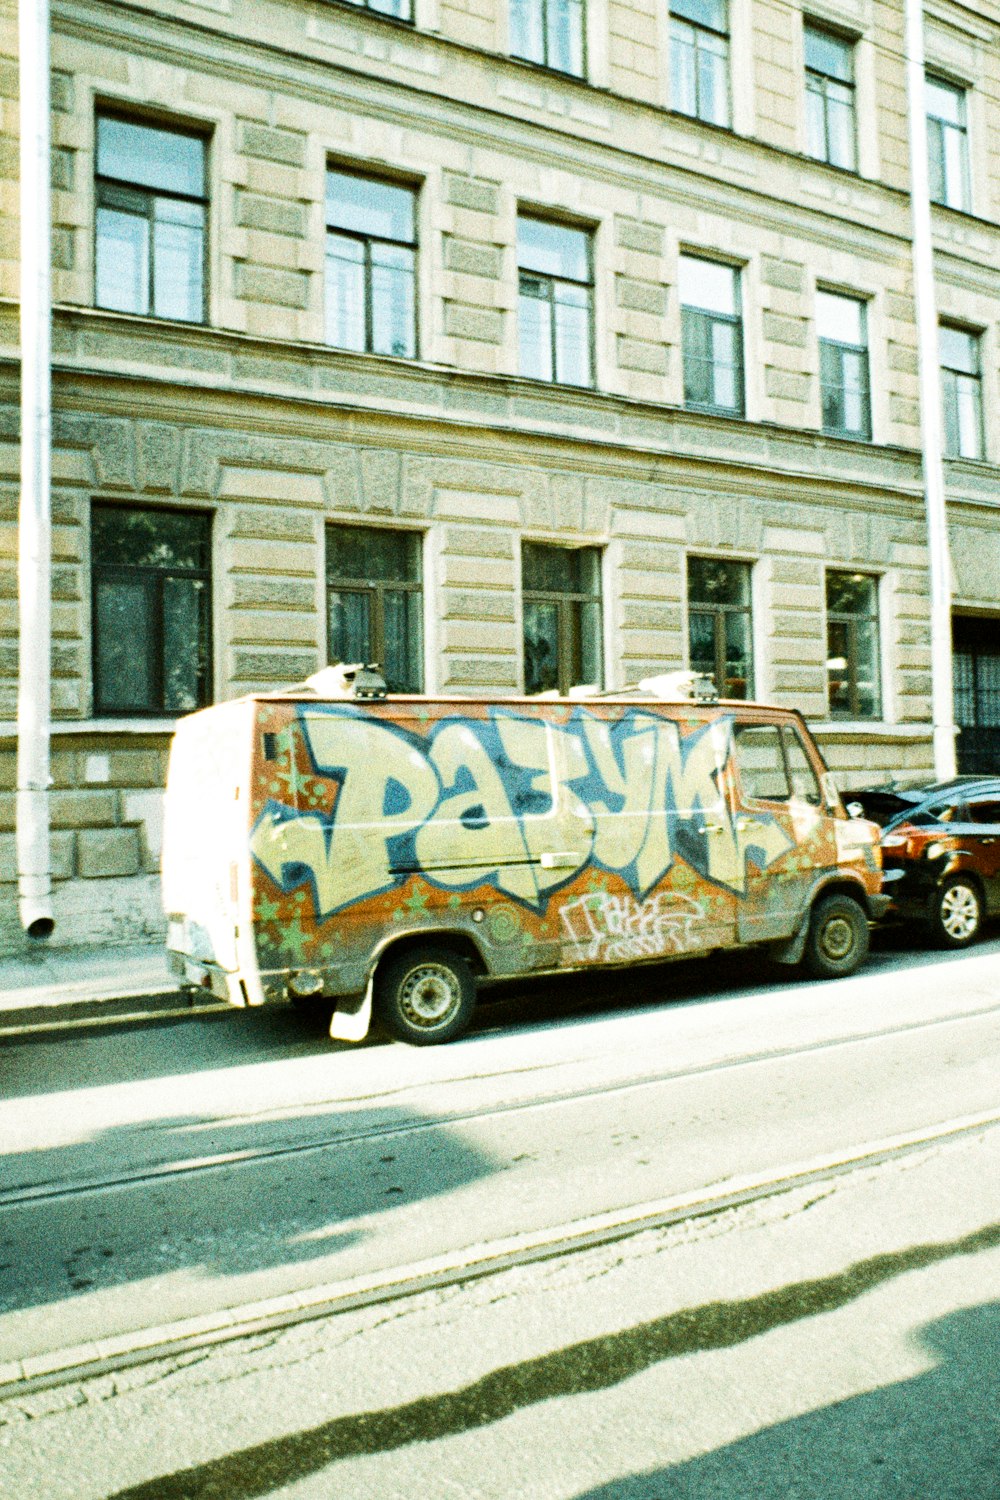 a truck with graffiti on it